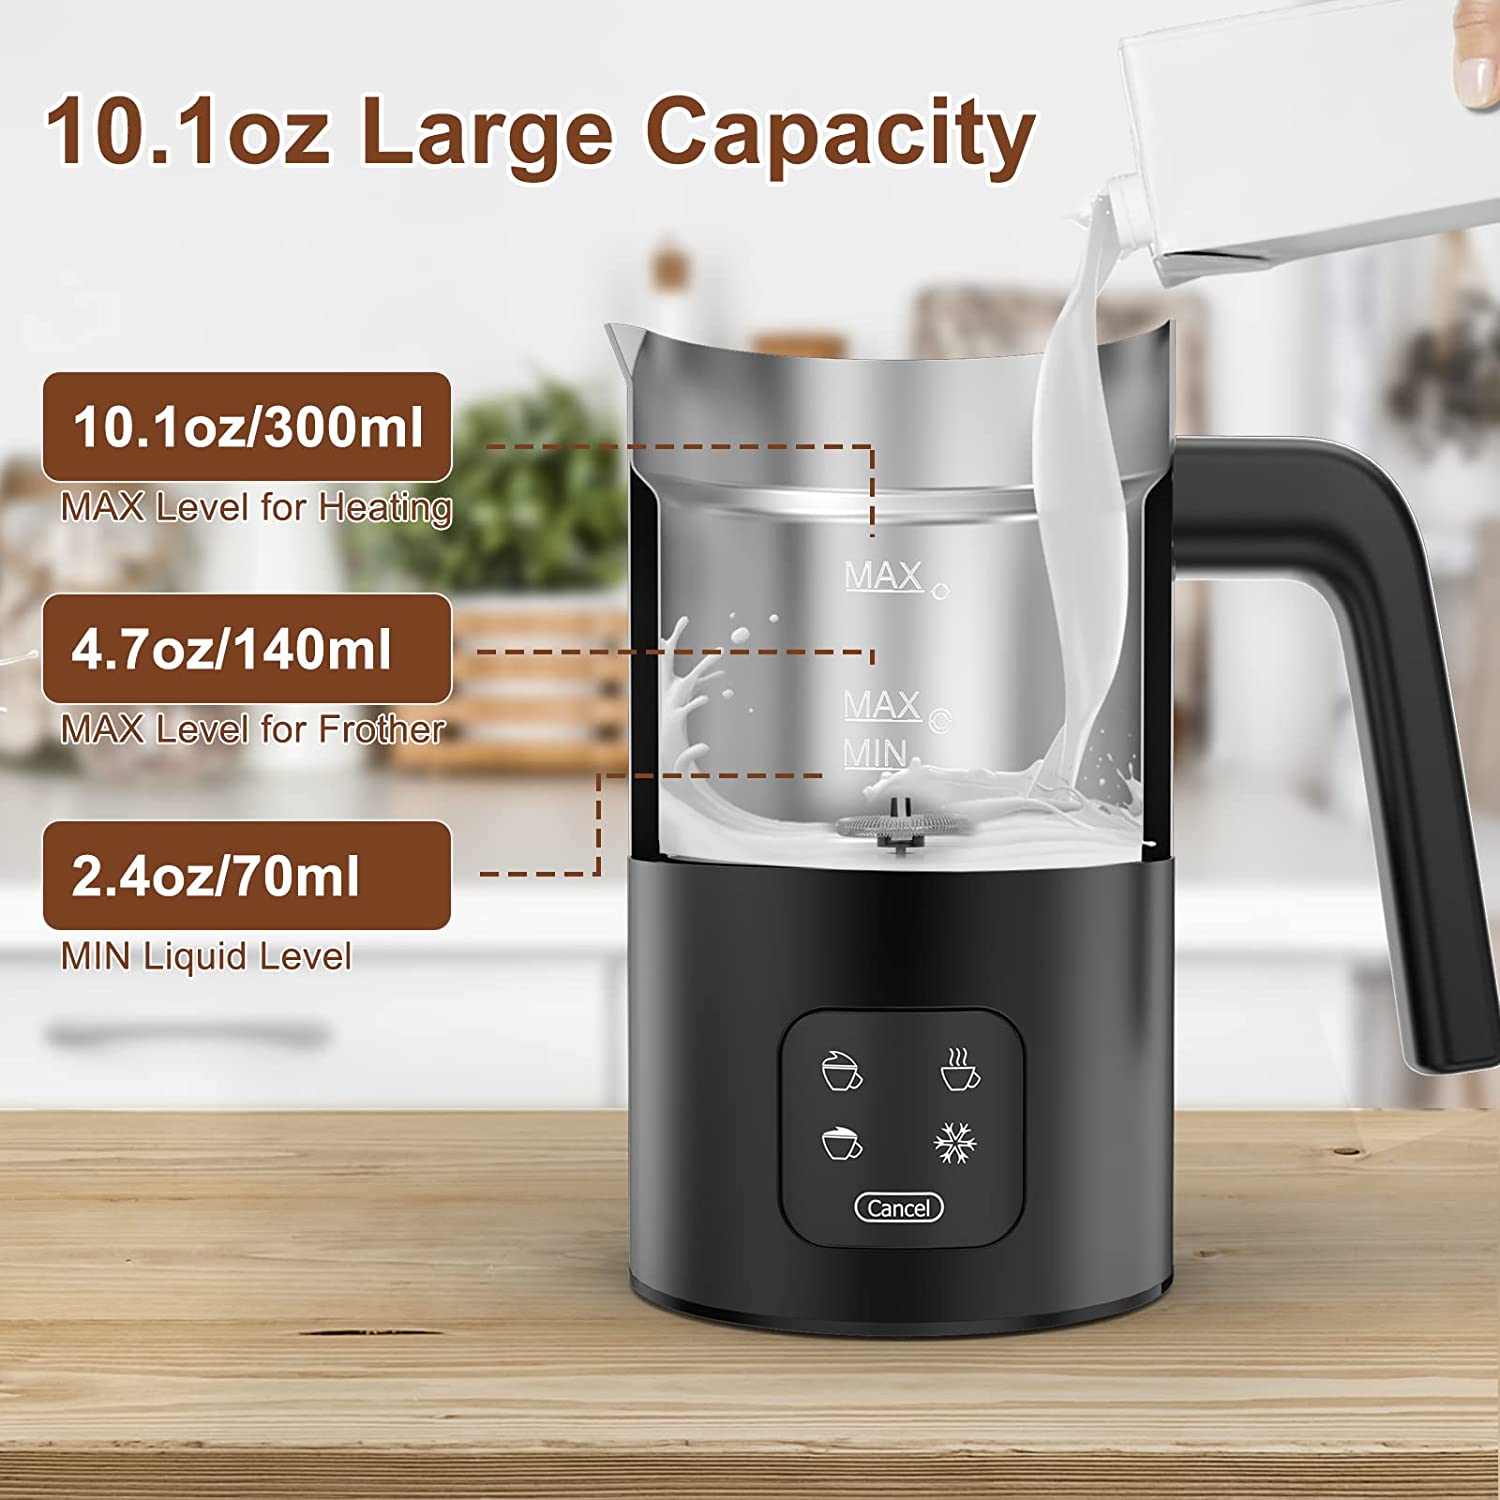 Electric Milk Frother, 4 in 1 Electric Milk Steamer, Automatic Warm and Cold Milk Foam Maker, 8.4oz/250ml, Stainless Steel Milk Warmer for Latte, Capp